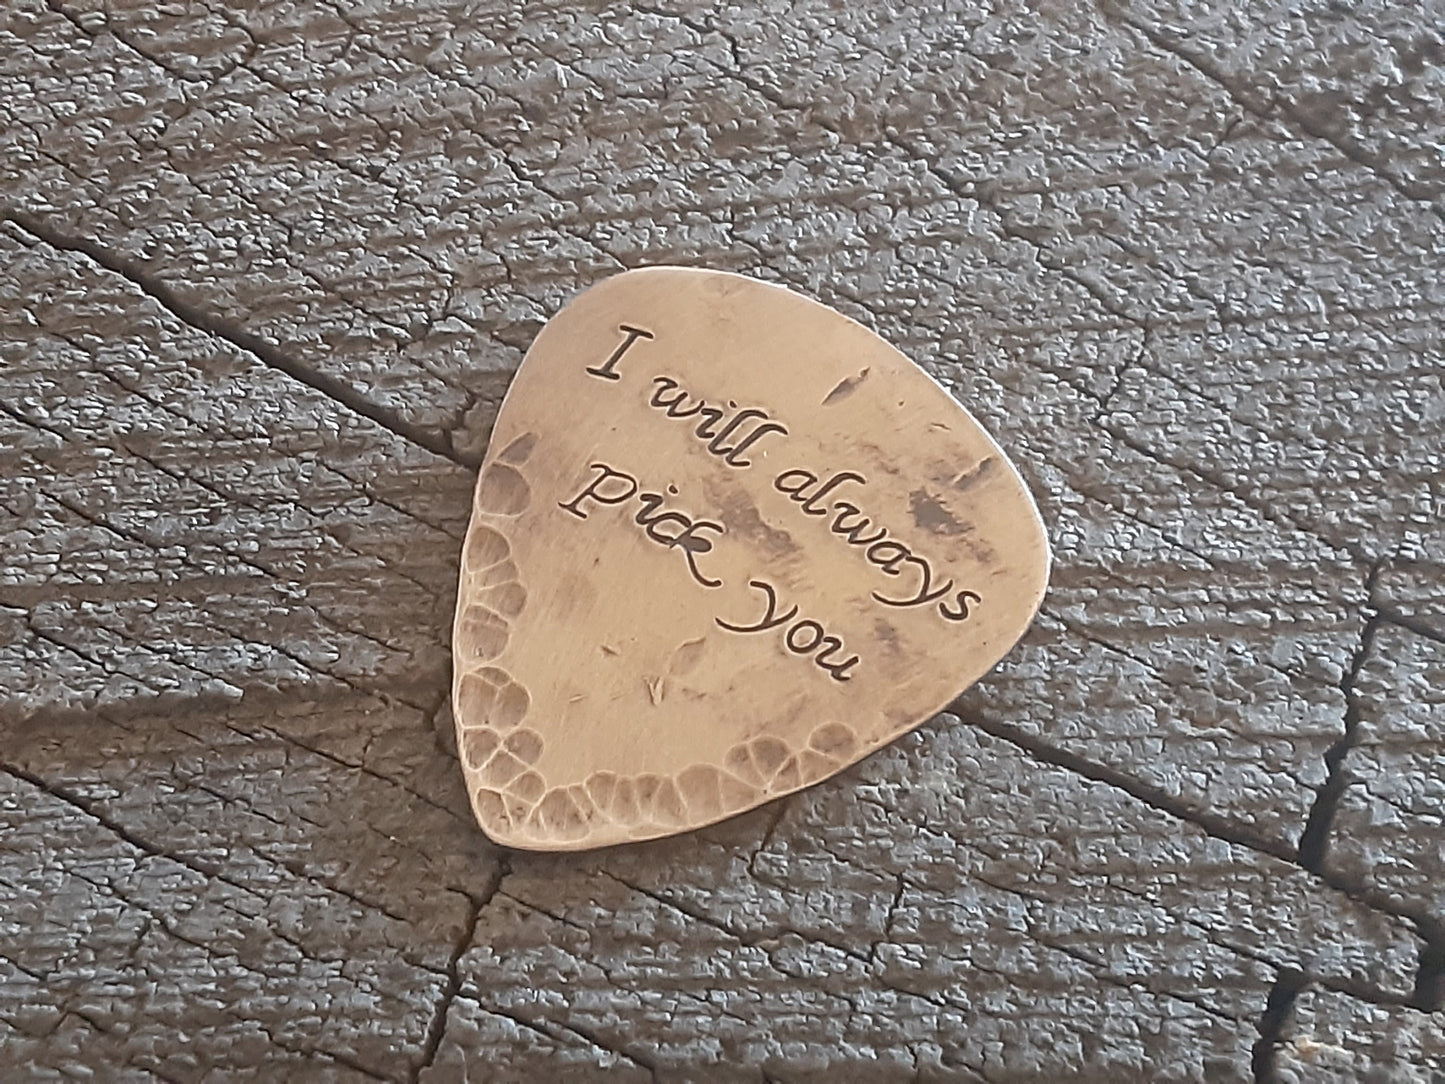 I will always pick you distressed bronze guitar pick